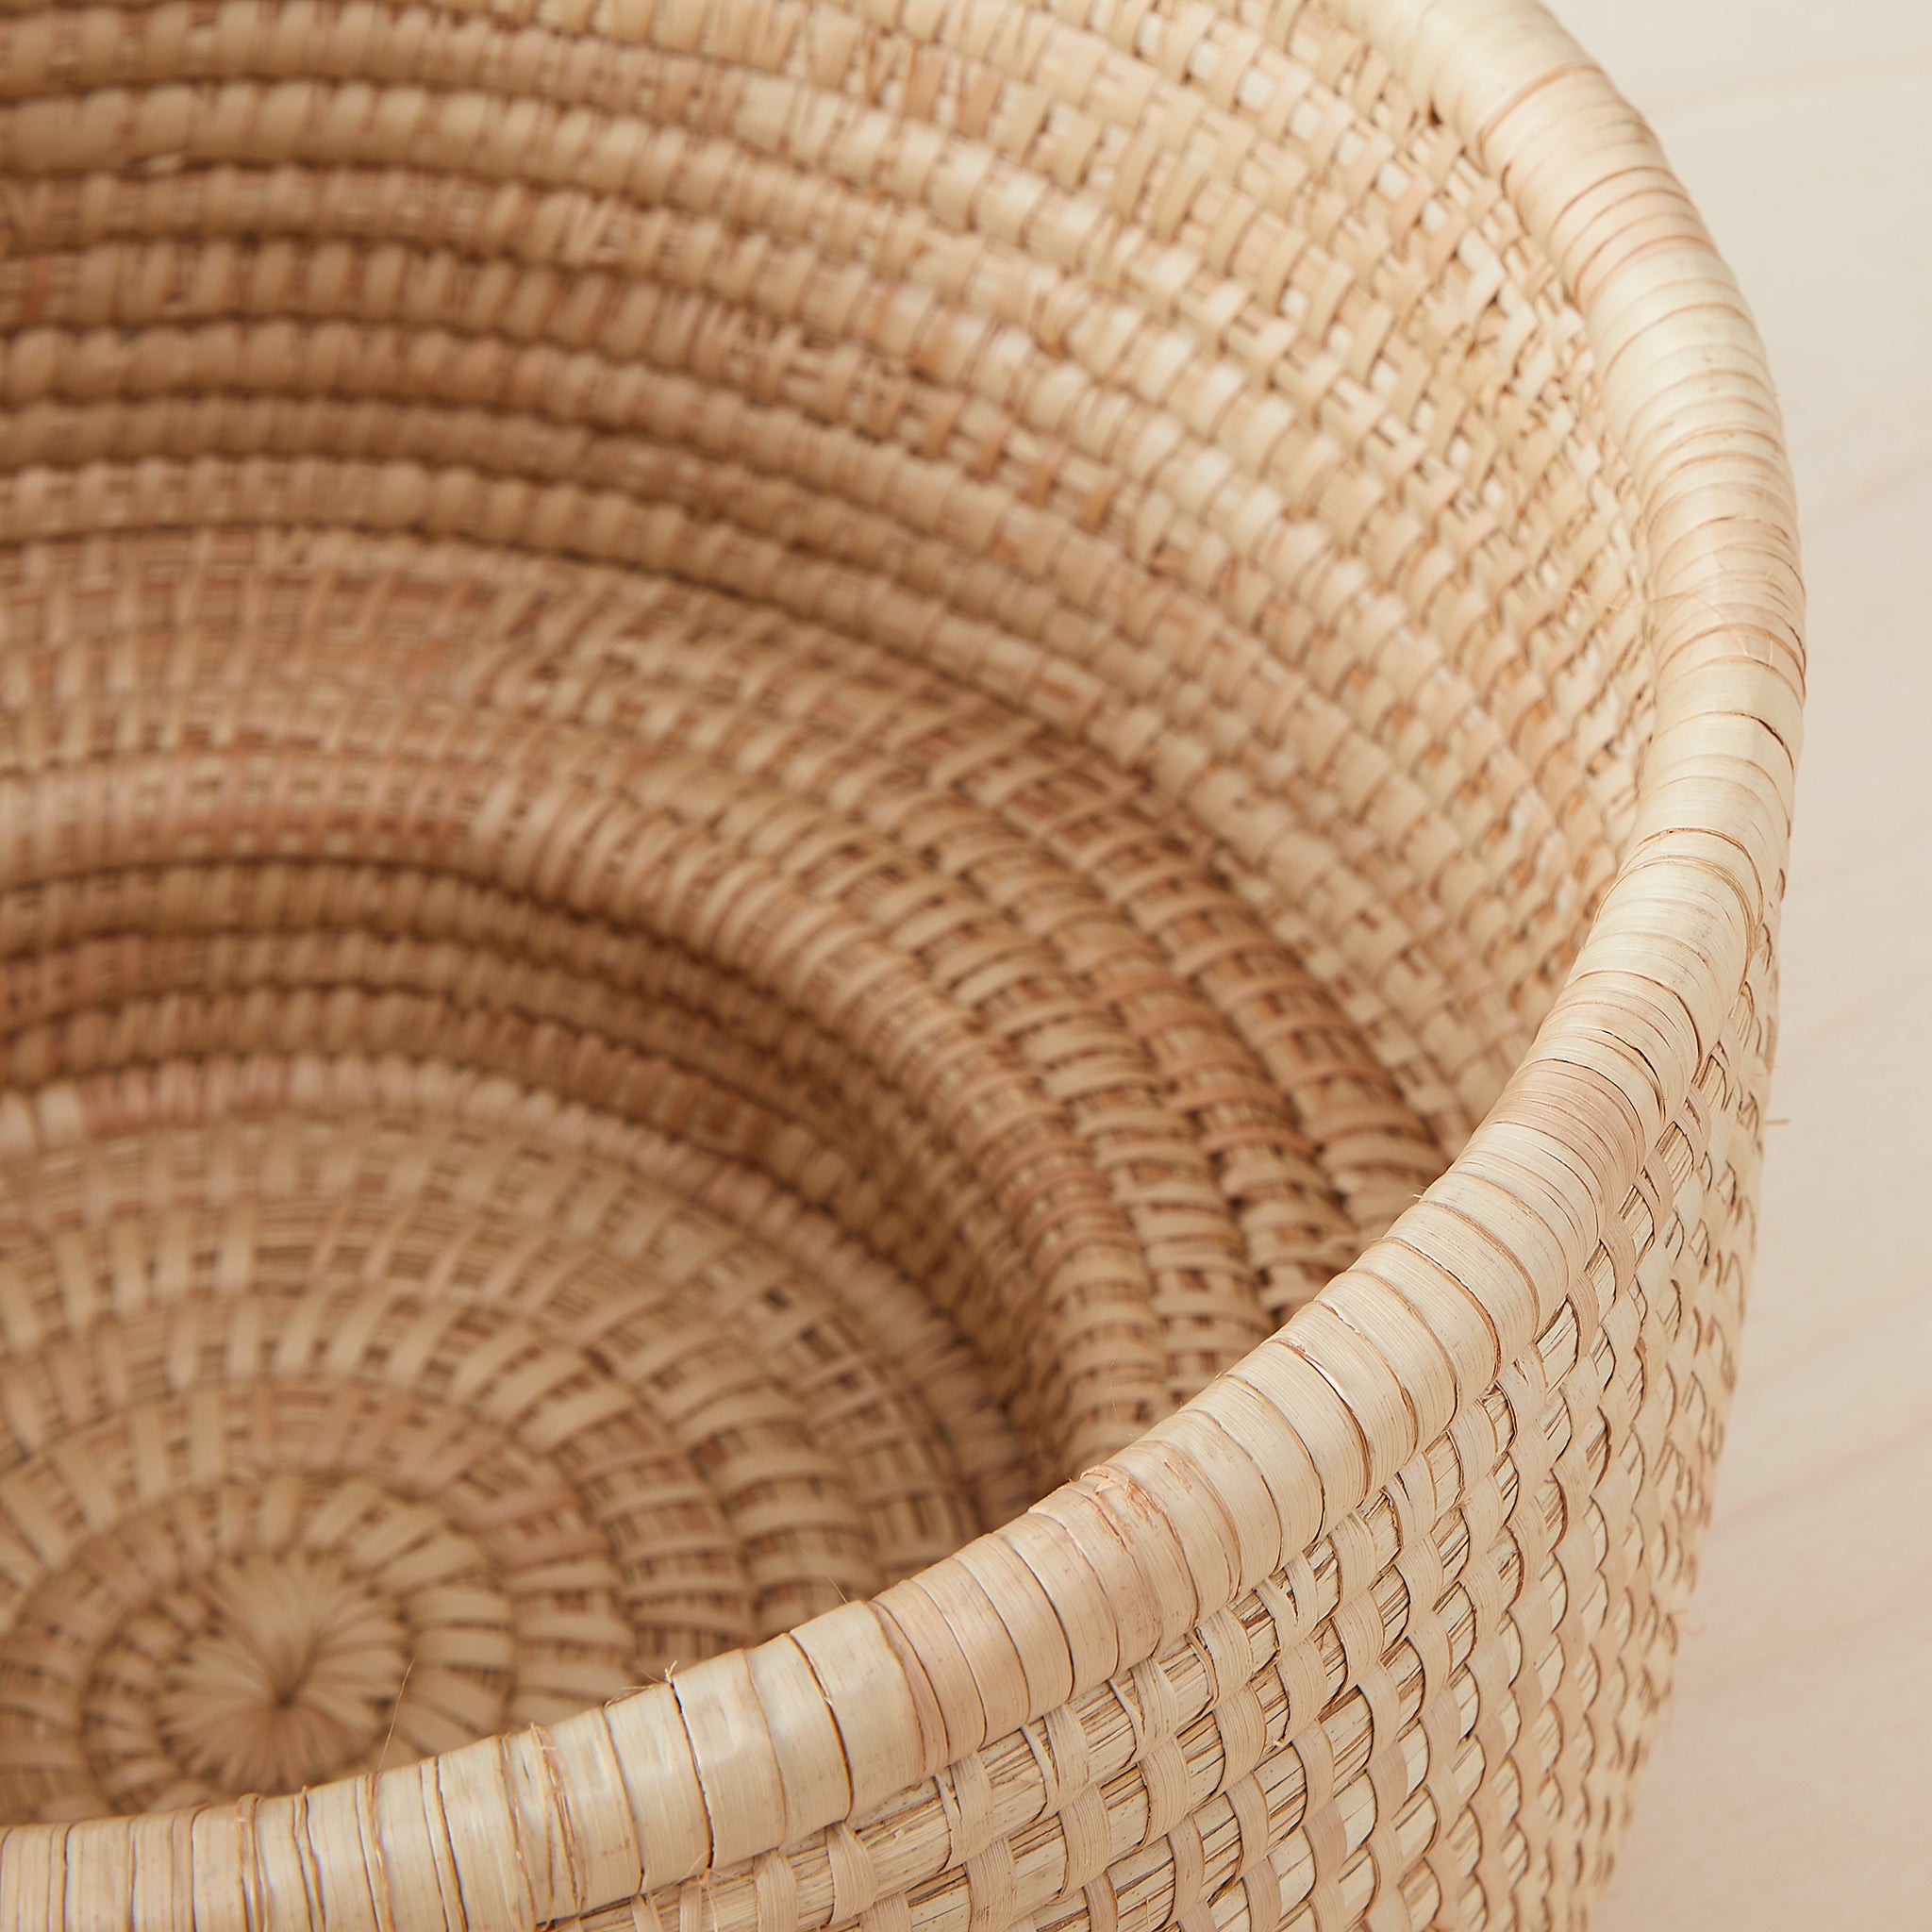  The Dengu basket in size Small is perfect as a table basket, on the shelf, in the bathroom or in the kitchen. Detail view. 